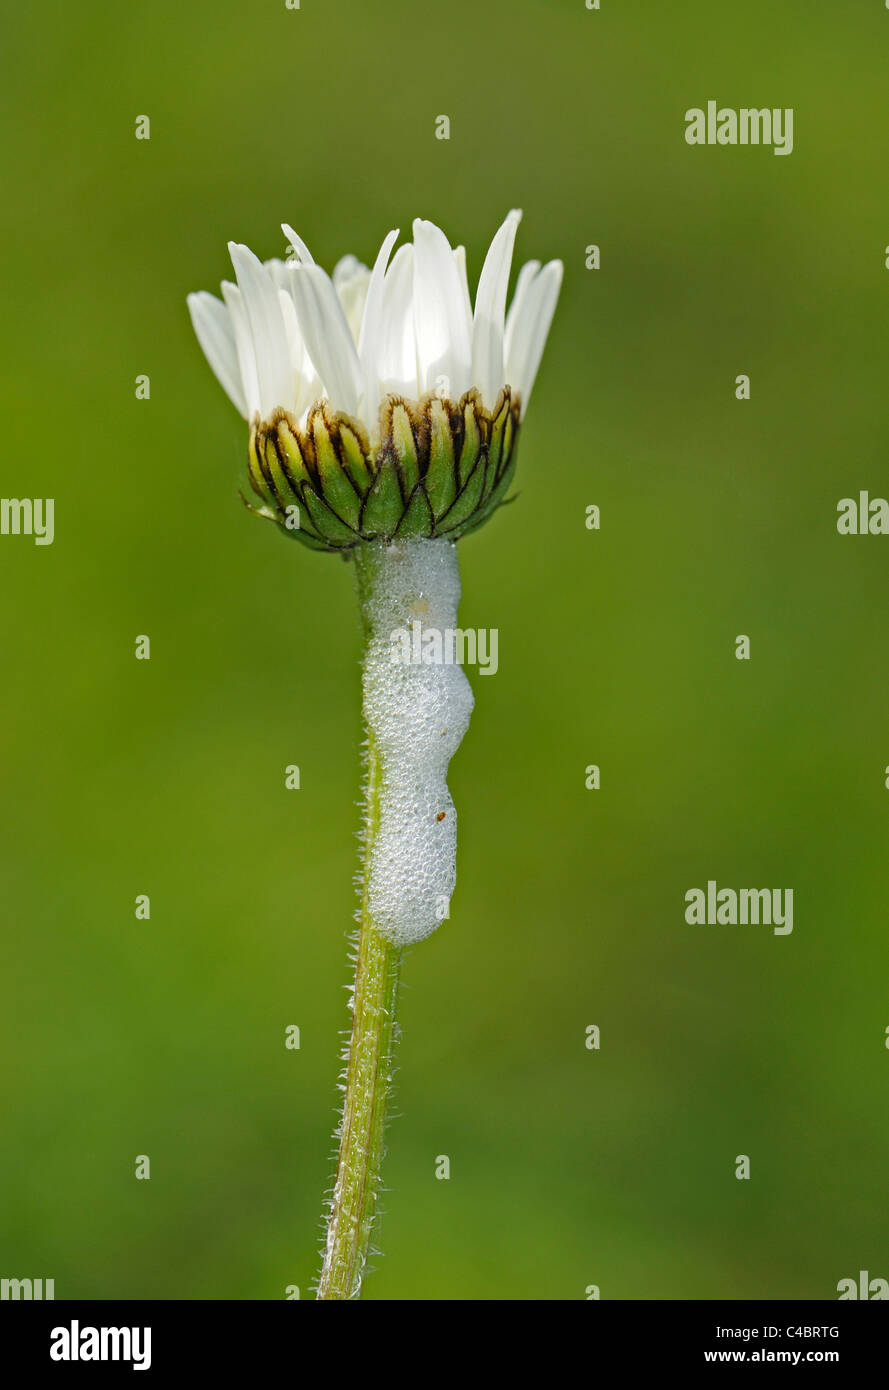 Close-up of Ox-eye daisy with cuckoo spit a white, frothy substance which is made by the froghopper a insect Stock Photo